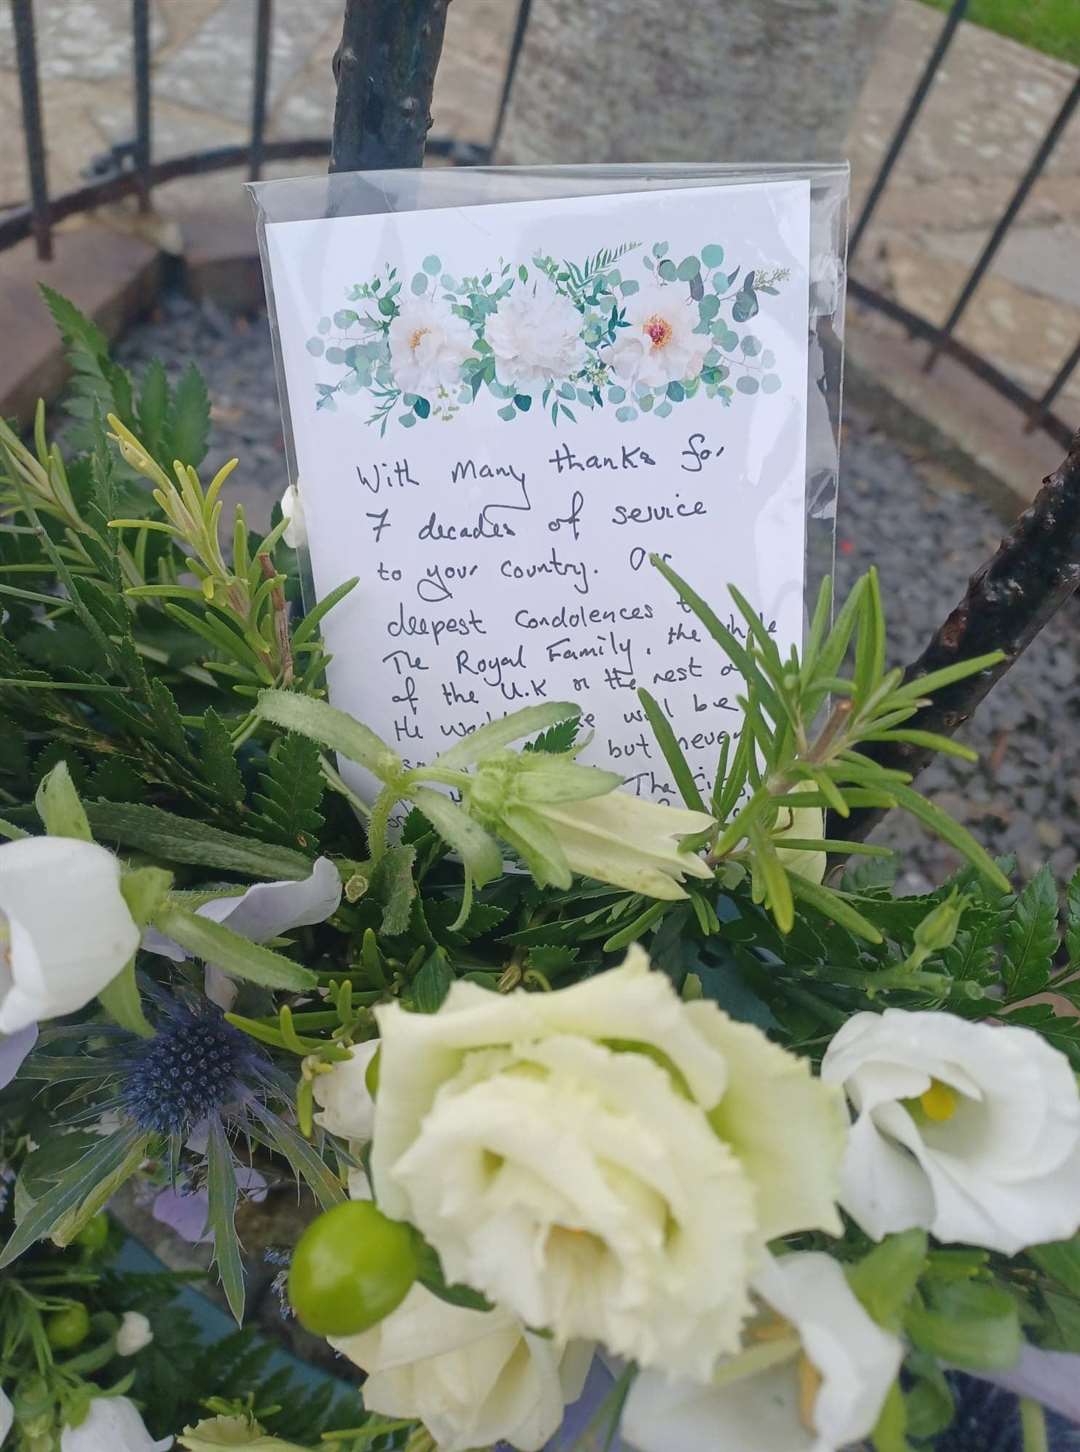 The message on the wreath at Wick acknowledging Her Majesty's 70 years of service and expressing condolences to the royal family.